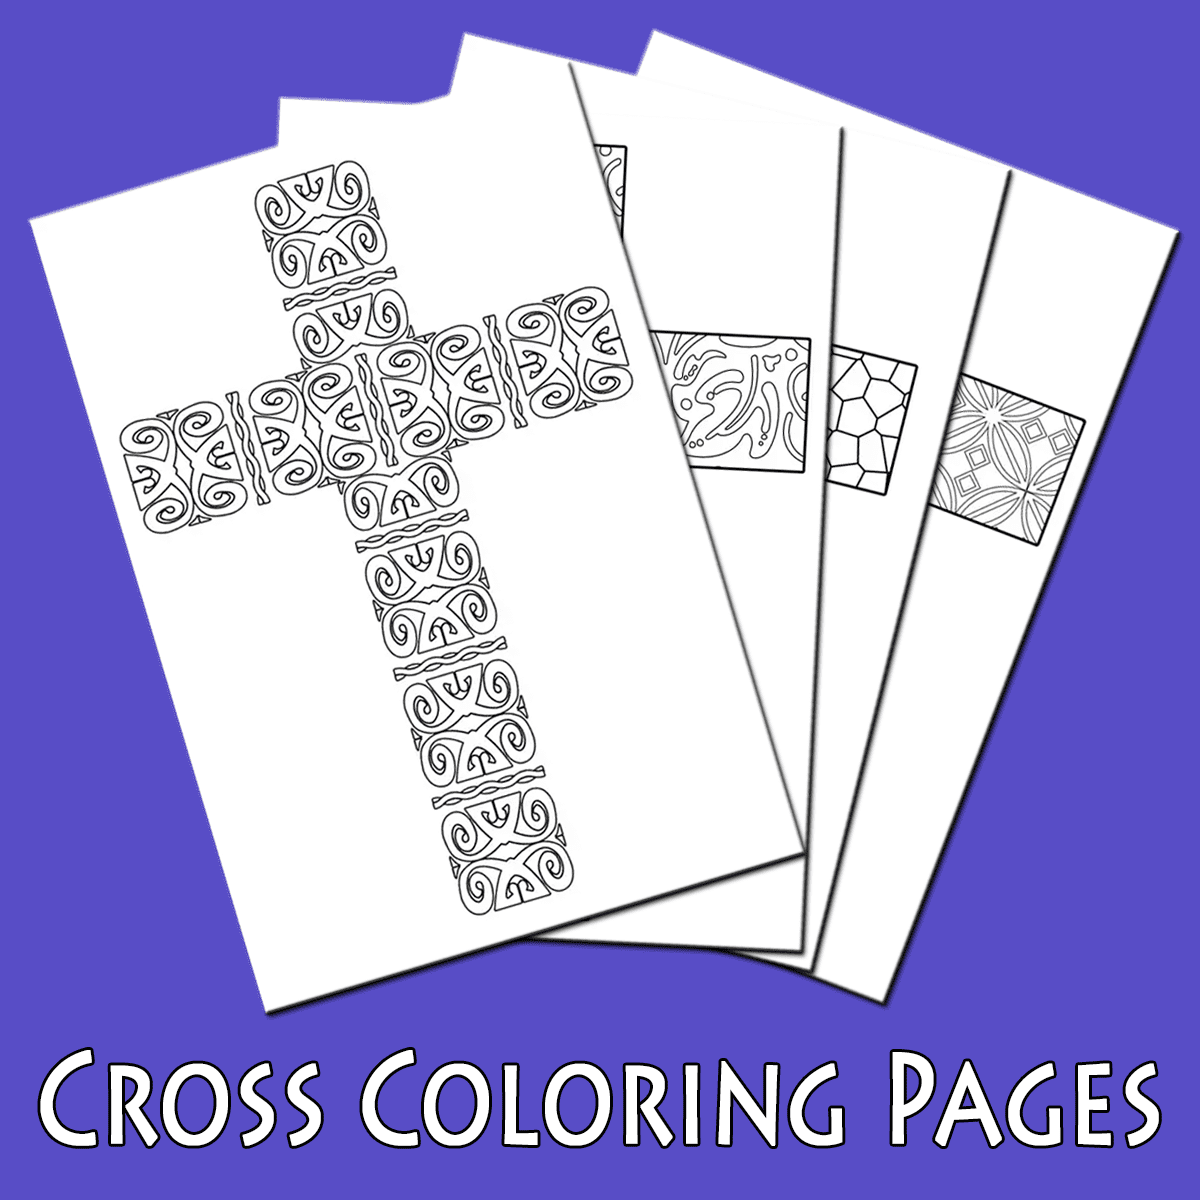 cross with heart coloring page